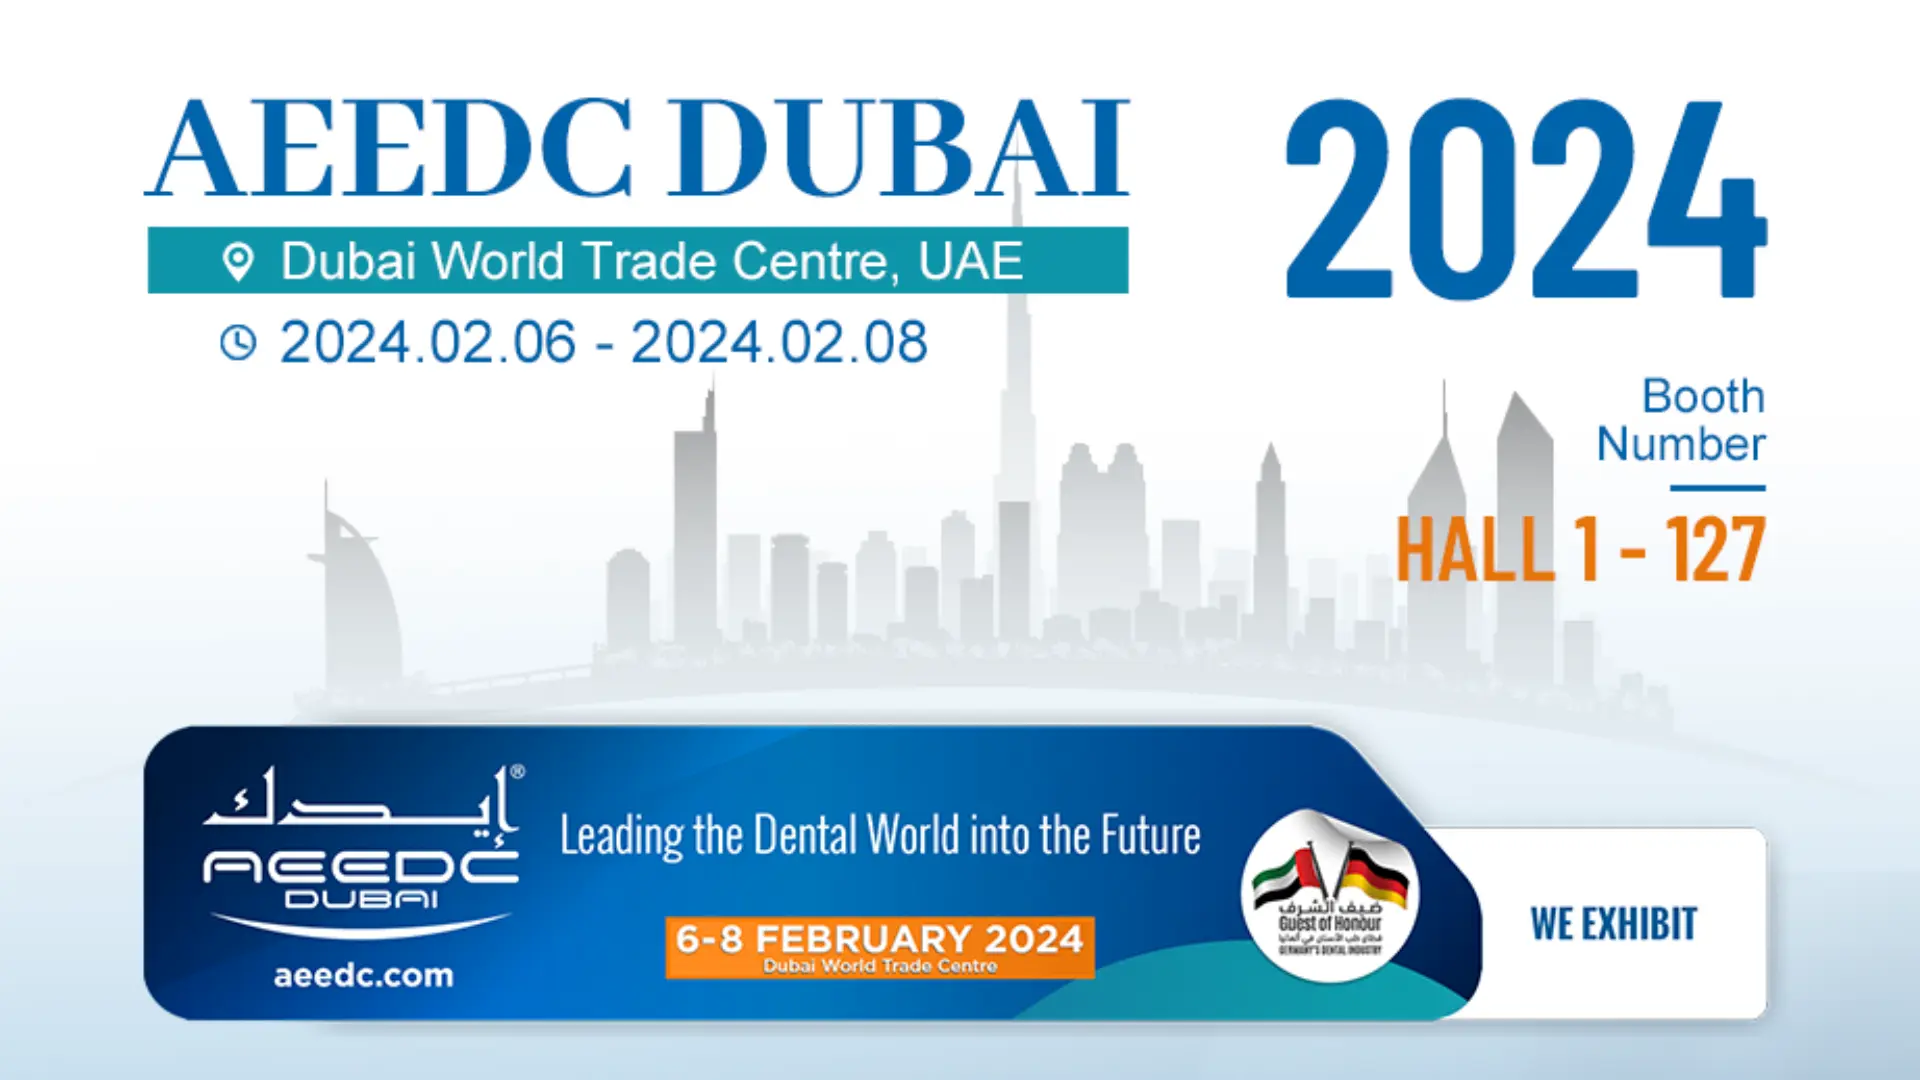 TWO BIG DENTISTRY EVENTS YOU CAN'T MISS : AEEDC Dubai 2024 and CIOSP 2024